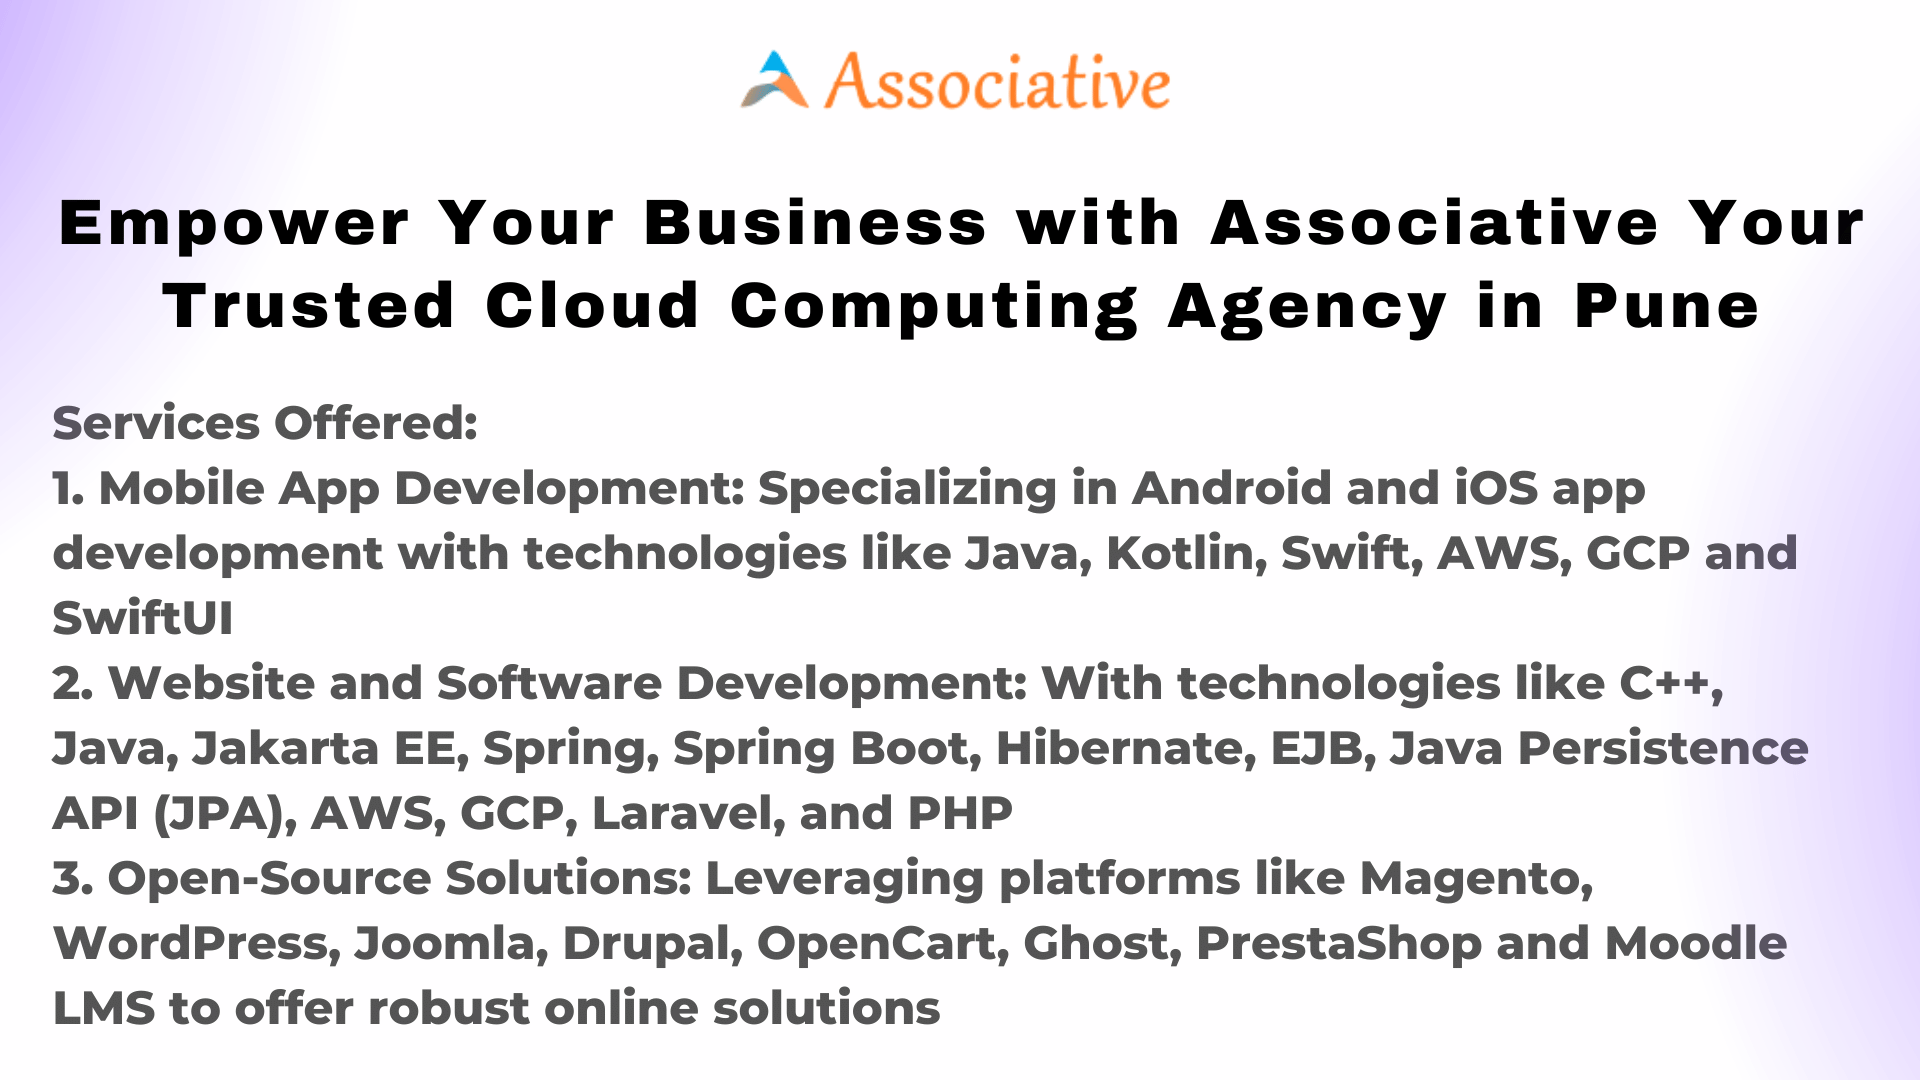 Empower Your Business with Associative Your Trusted Cloud Computing Agency in Pune